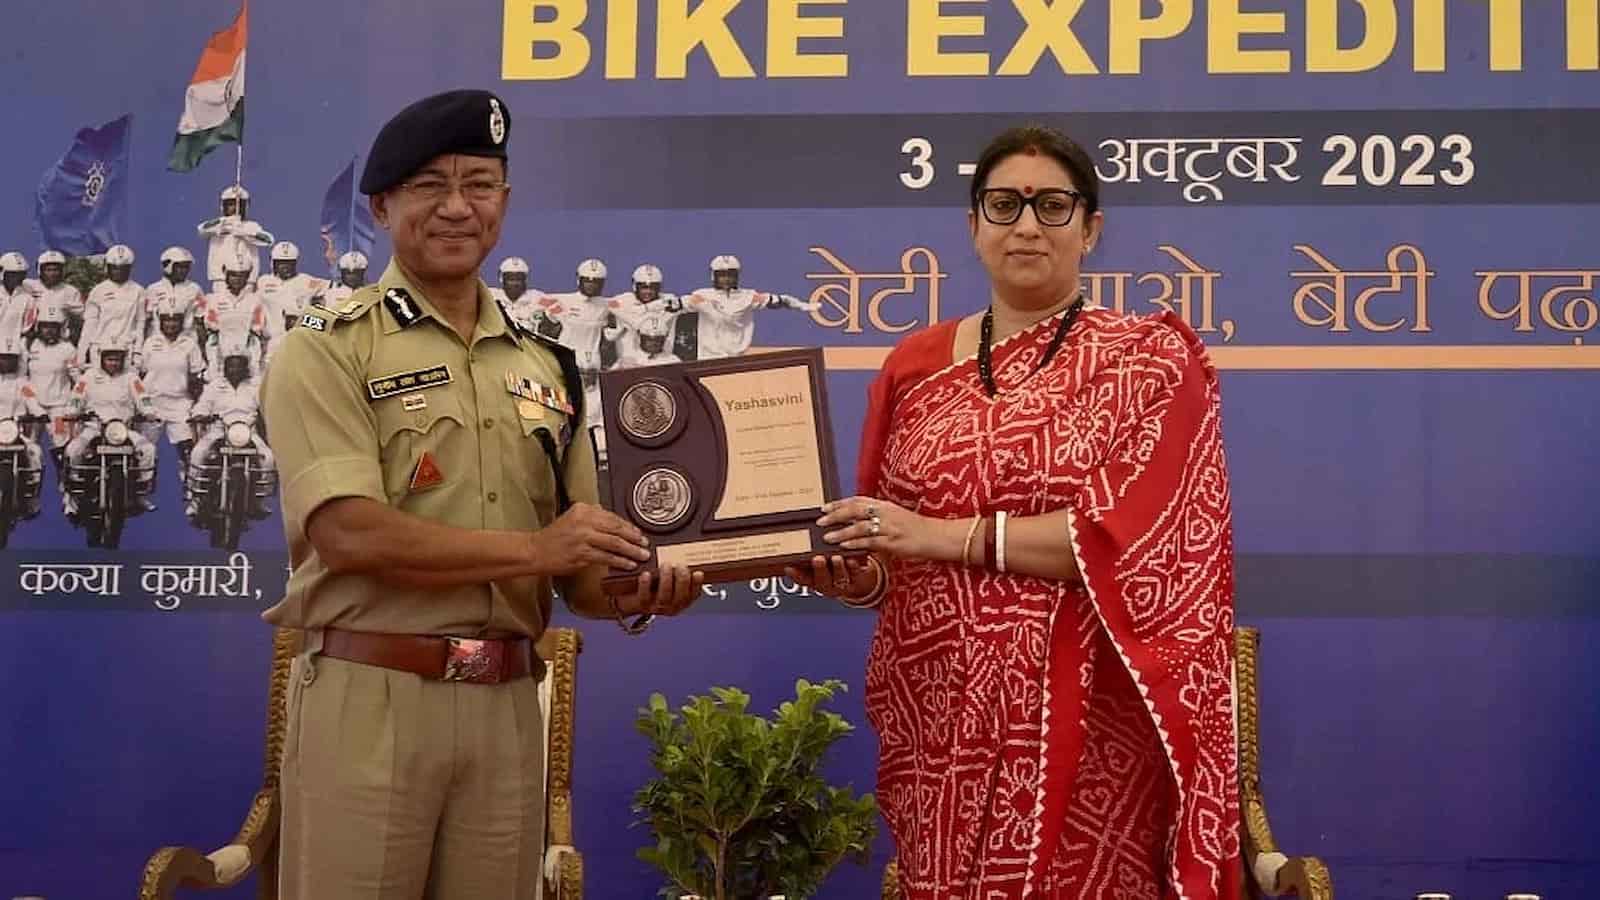 CRPF Women Motorcycle Expedition Celebrates Unity and Women's Empowerment